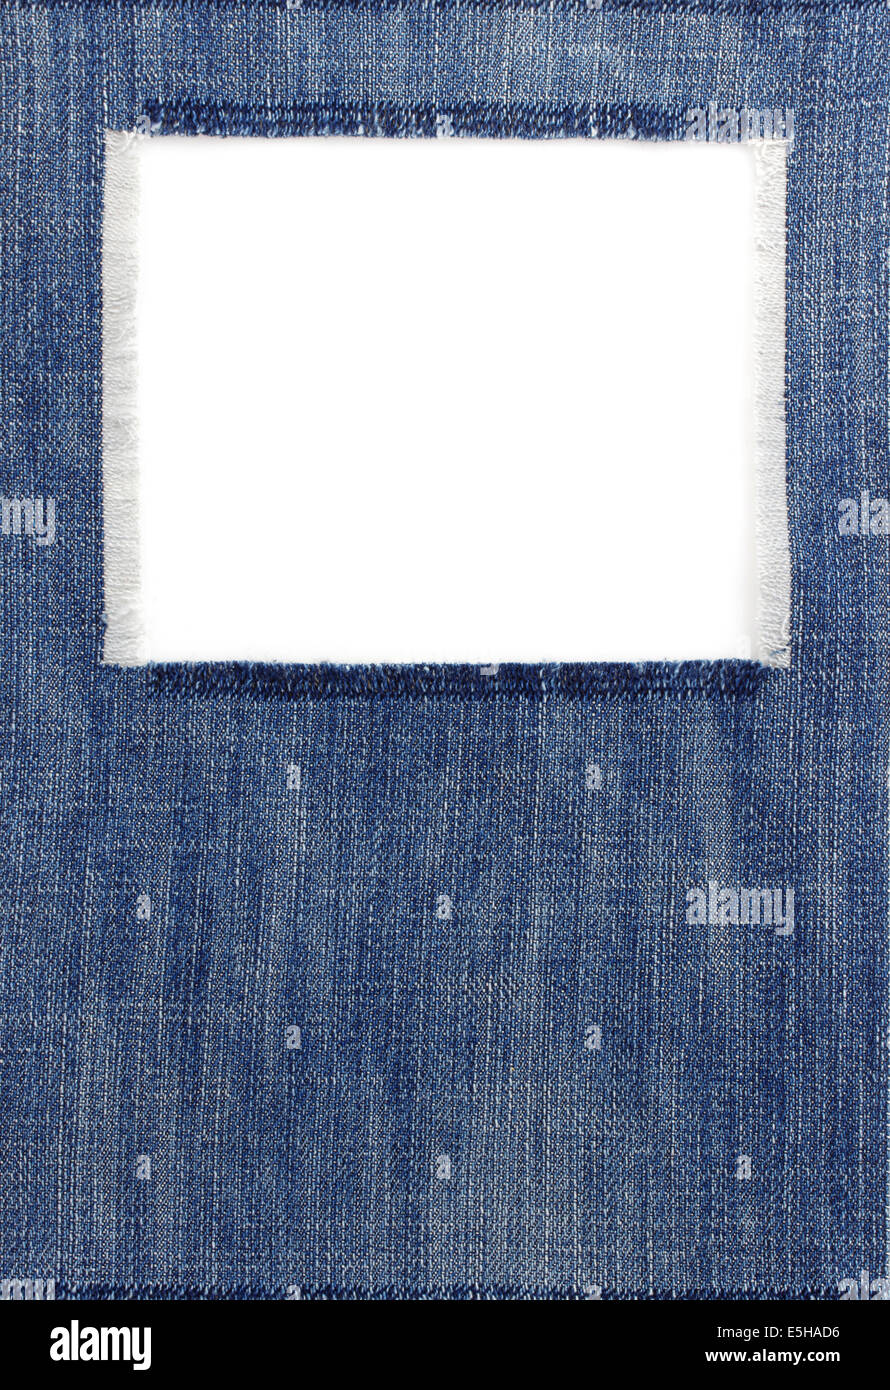 jeans blue texture on white background Stock Photo